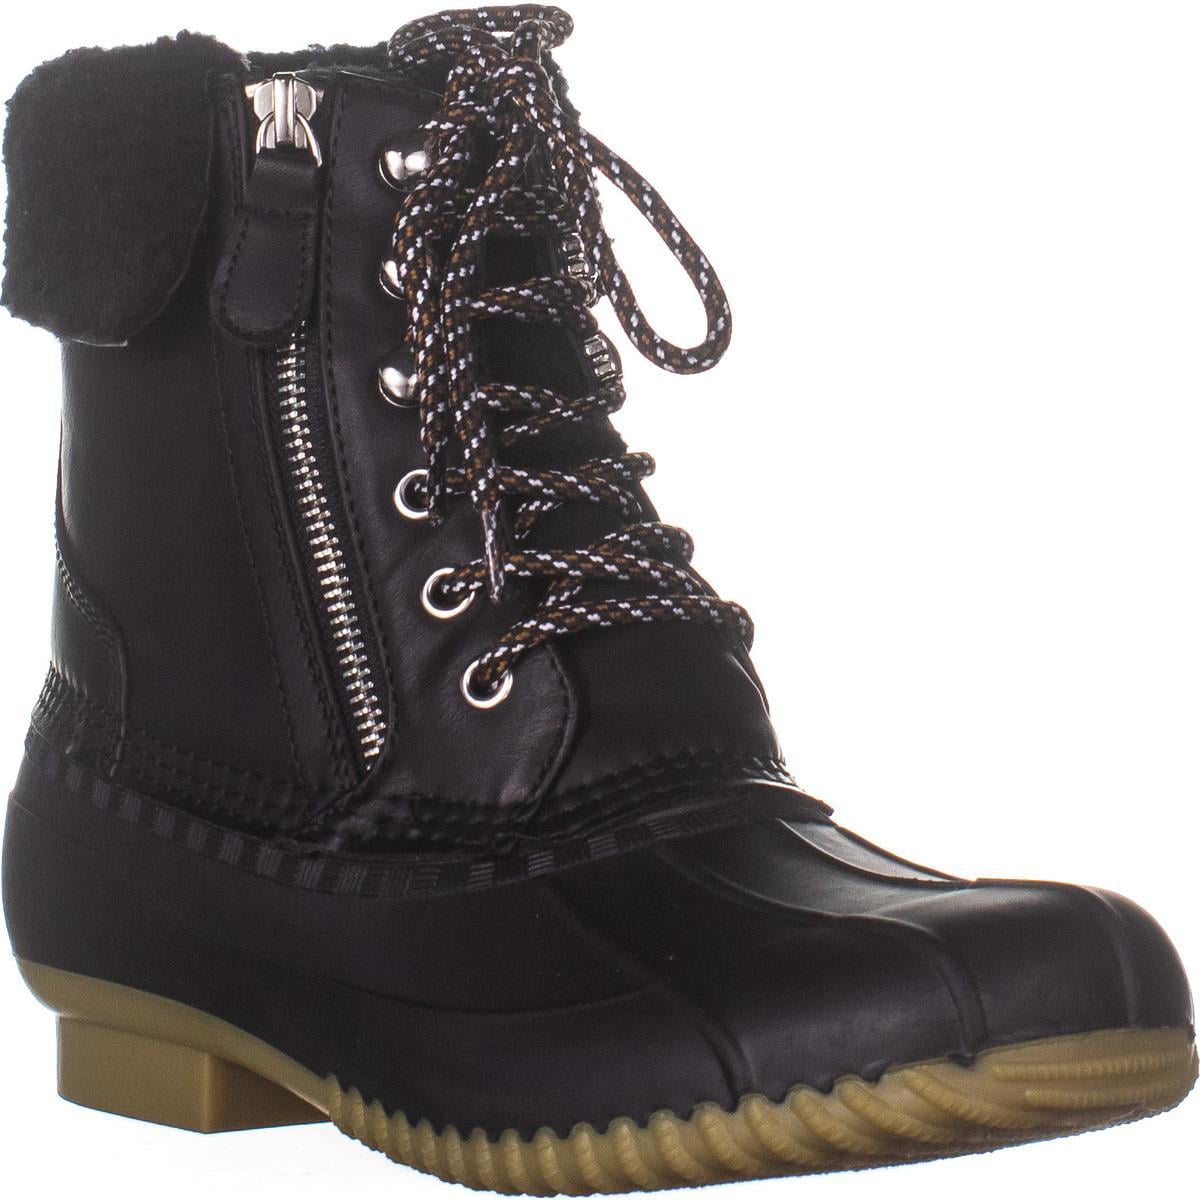 US Winter Tommy Raheli2 Lace Black, 8 Boots, Womens Hilfiger Up